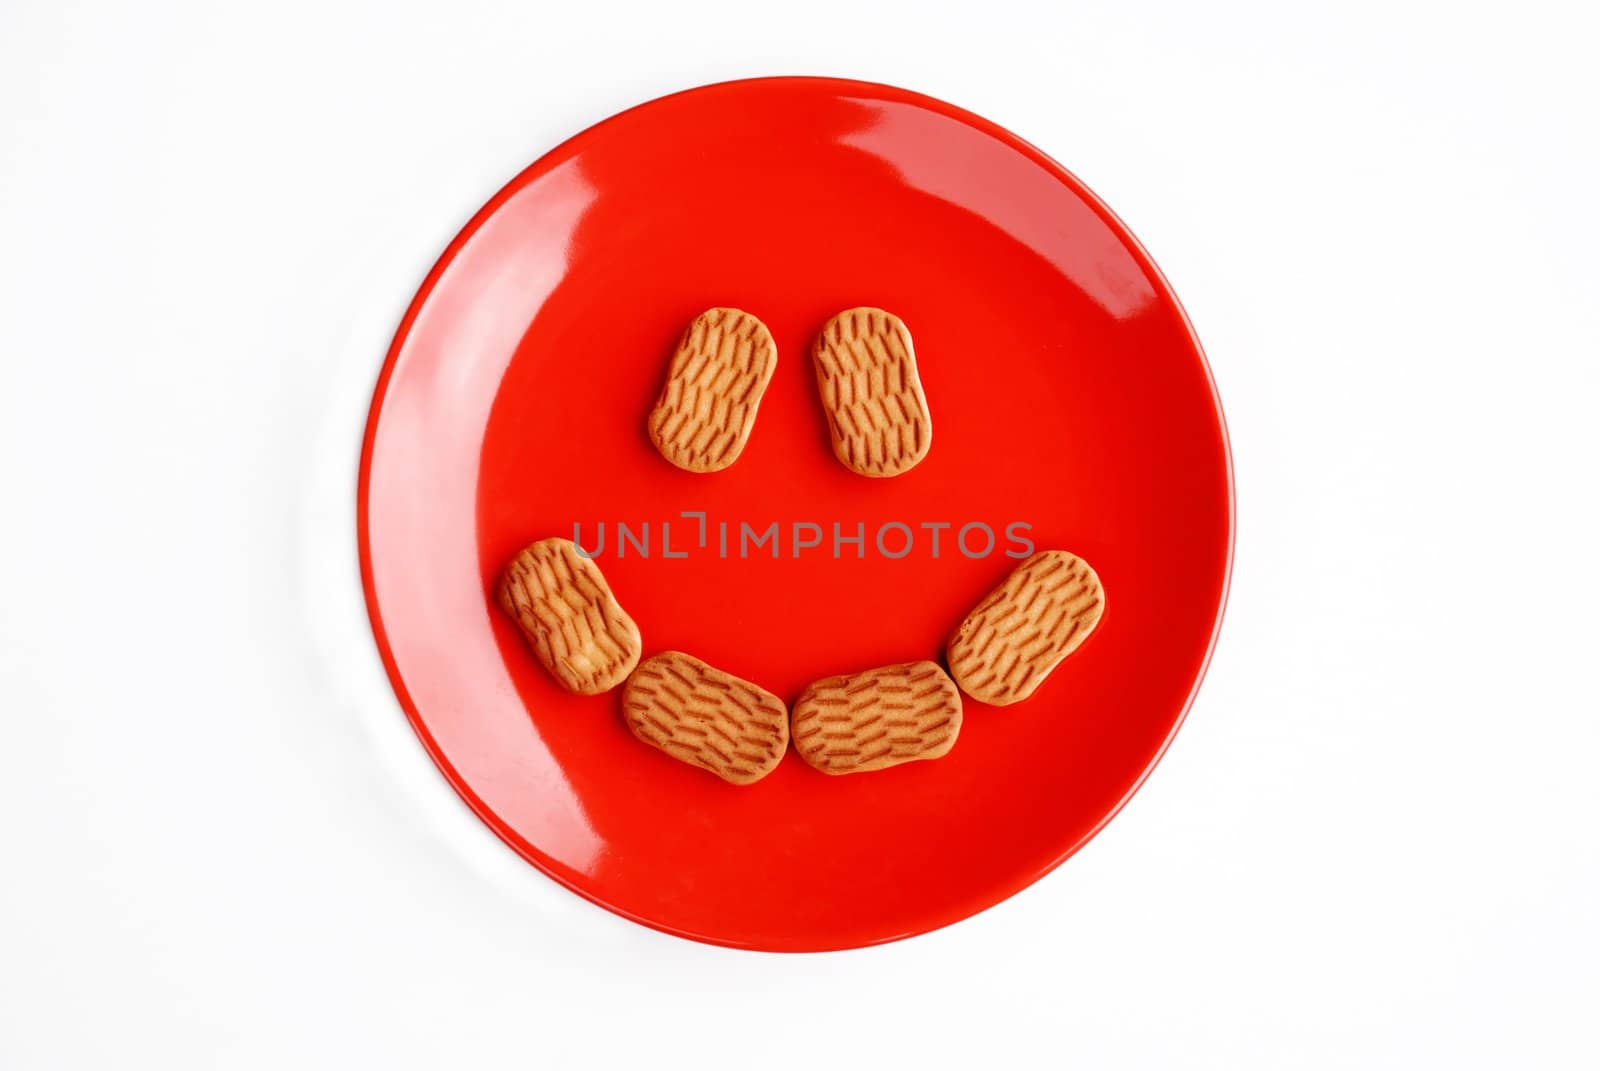 Smiling plate by simply